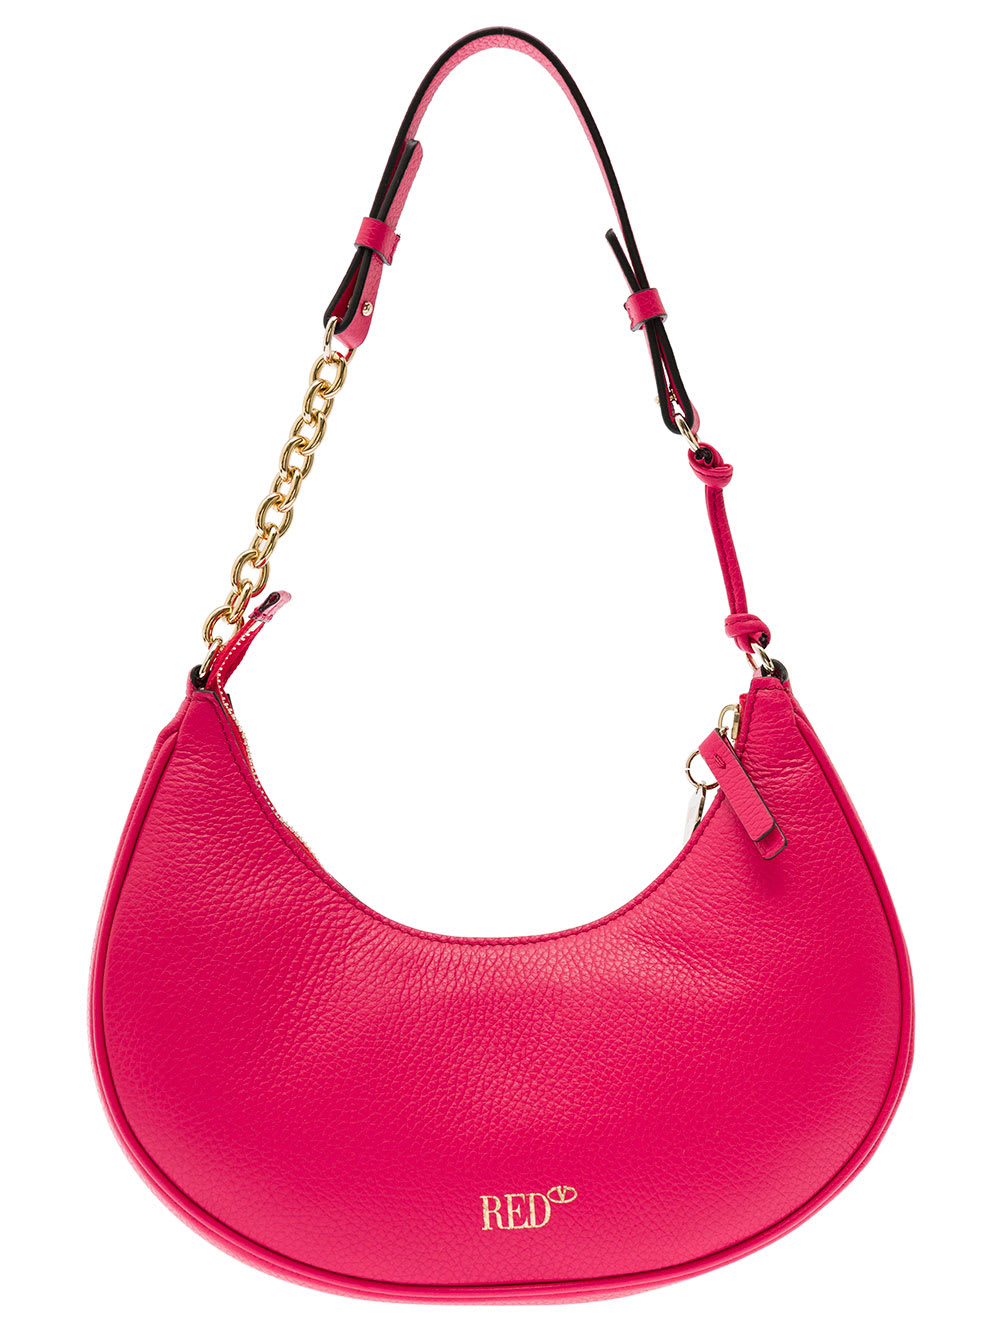 RED VALENTINO TO THE MOON AND RED HOBO SHOULDER BAG IN RED LEATHER WOMAN